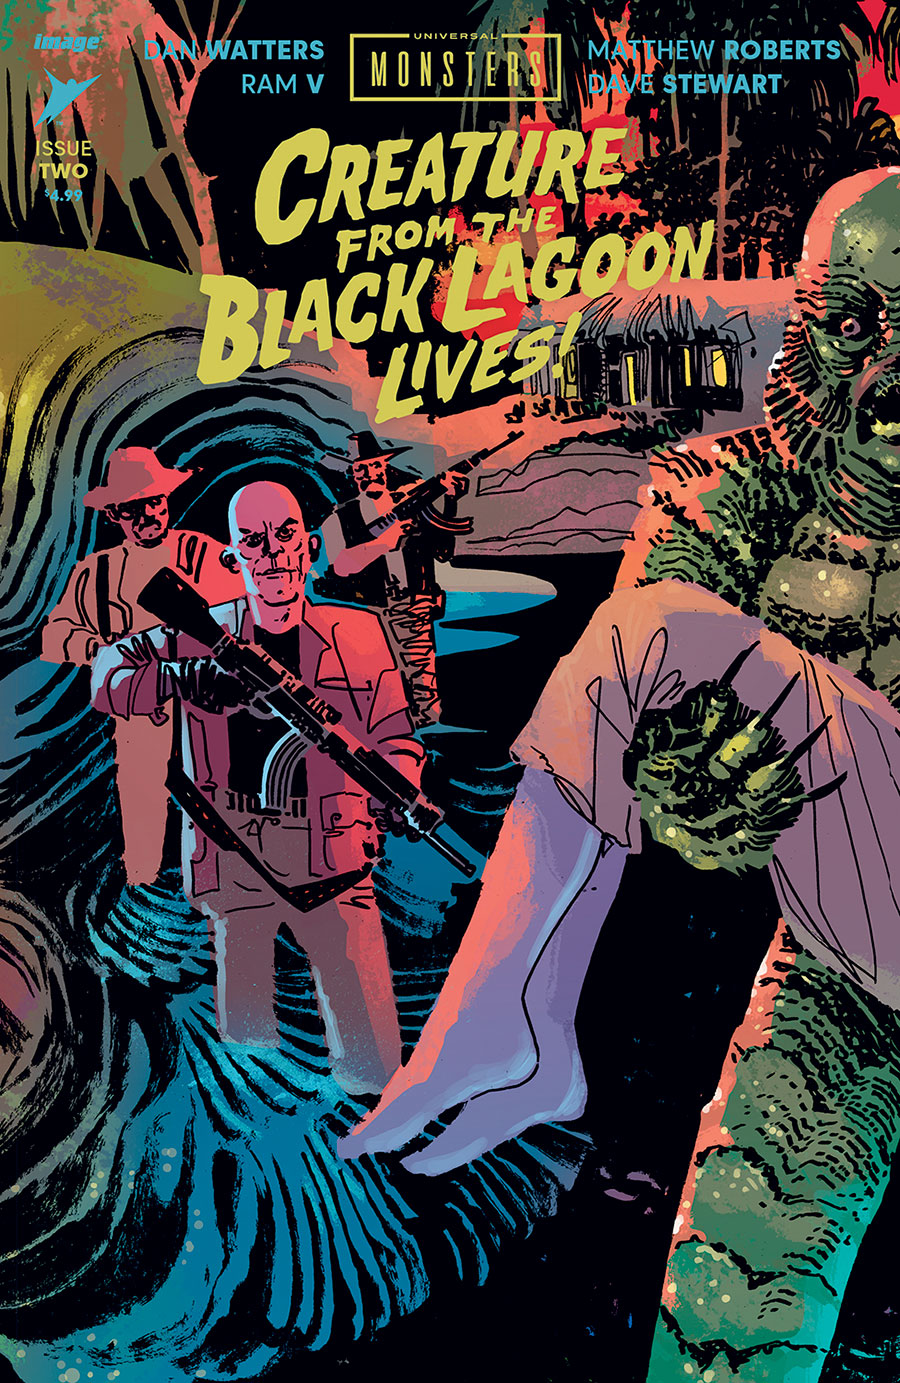 Universal Monsters Creature From The Black Lagoon Lives #2 Cover C Incentive DANI Connecting Variant Cover